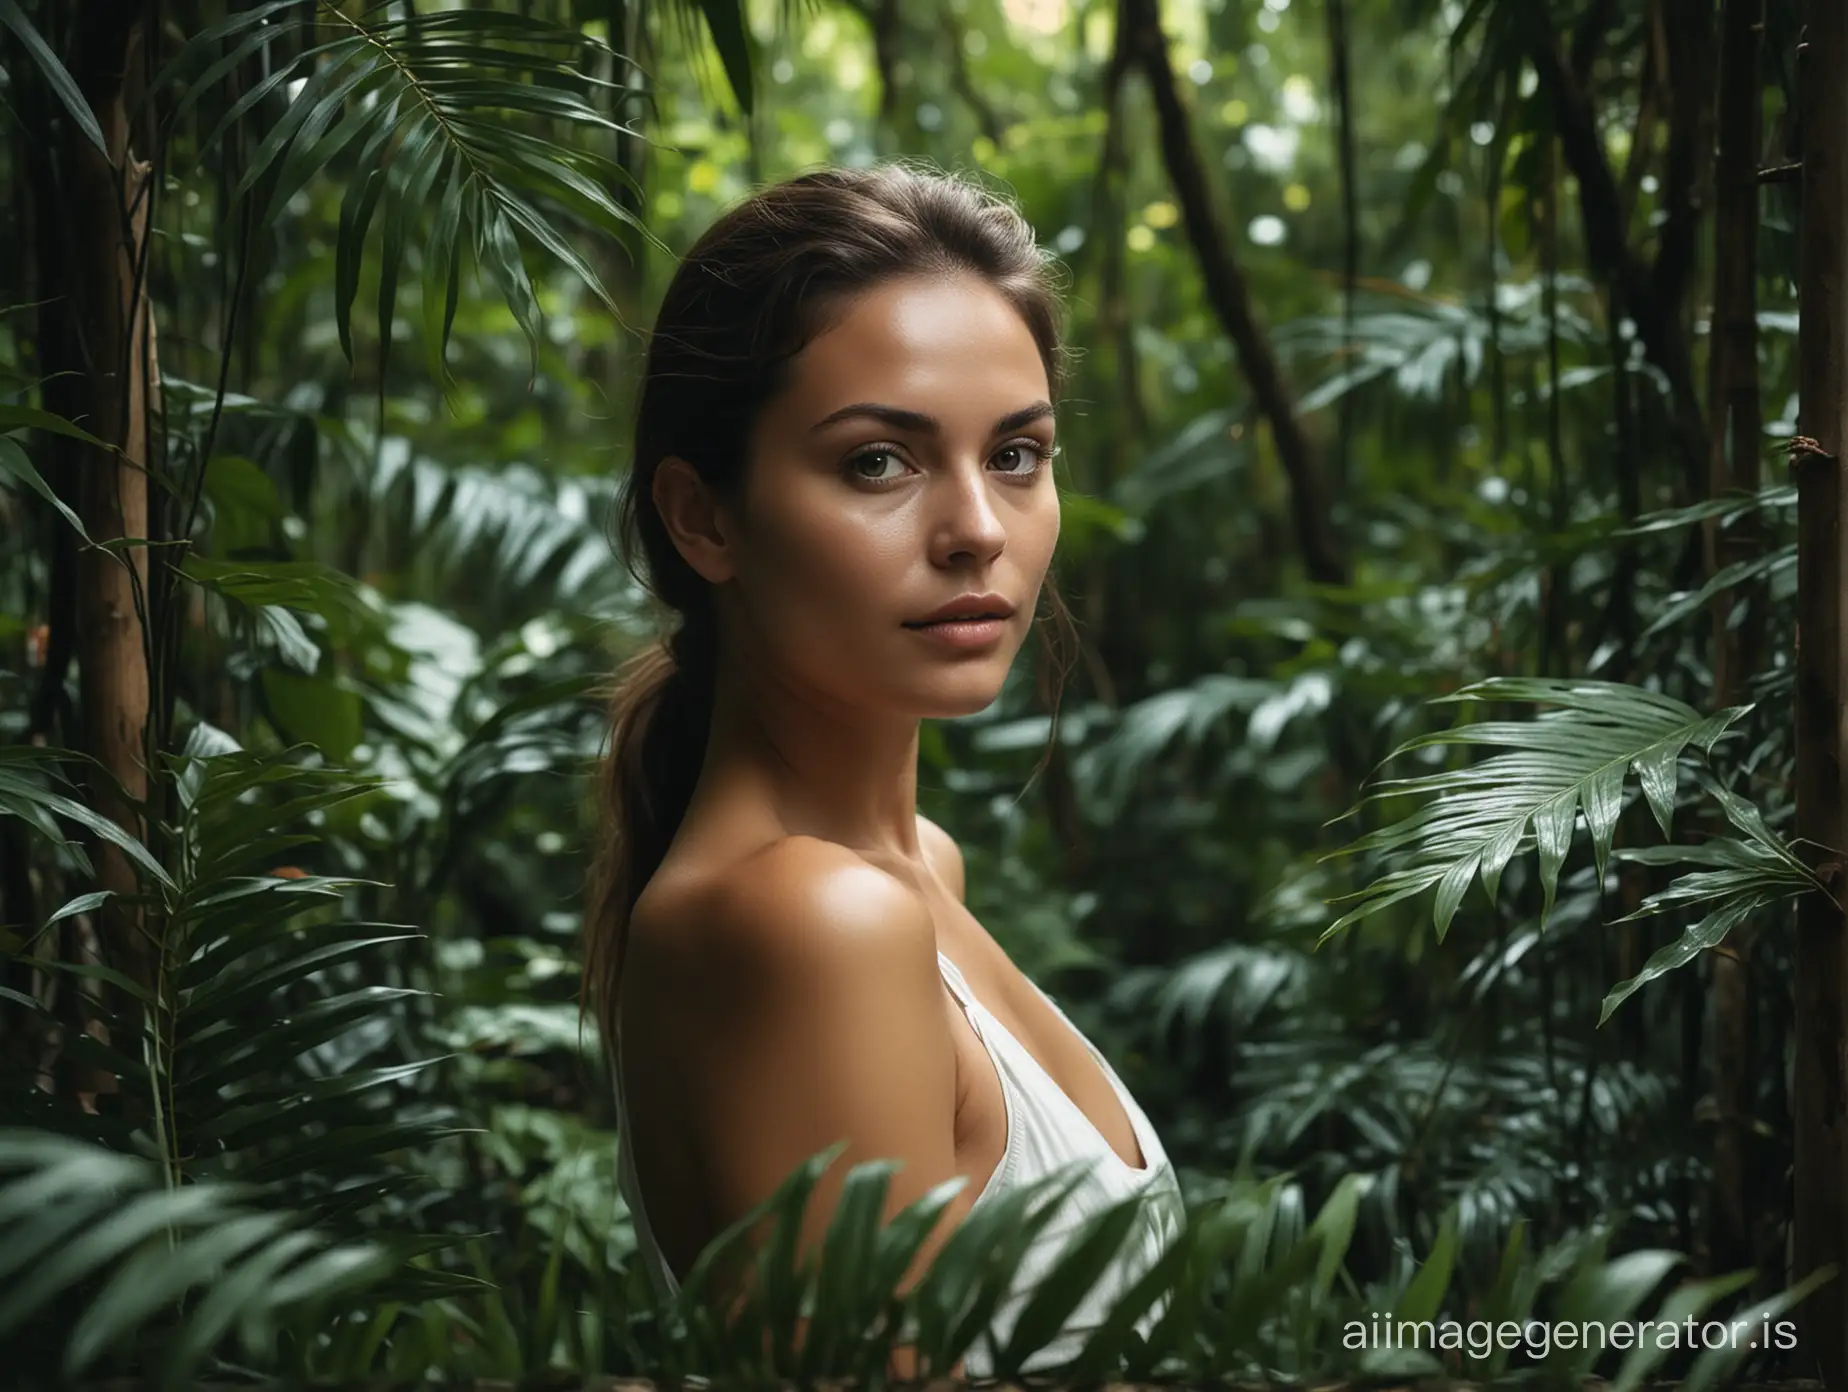 sustainable luxury lifestyle of a woman in a dark jungle for health, wellness and organic bodycare. Skin care, body care and natural cosmetics treatment for healthy skin and body for model